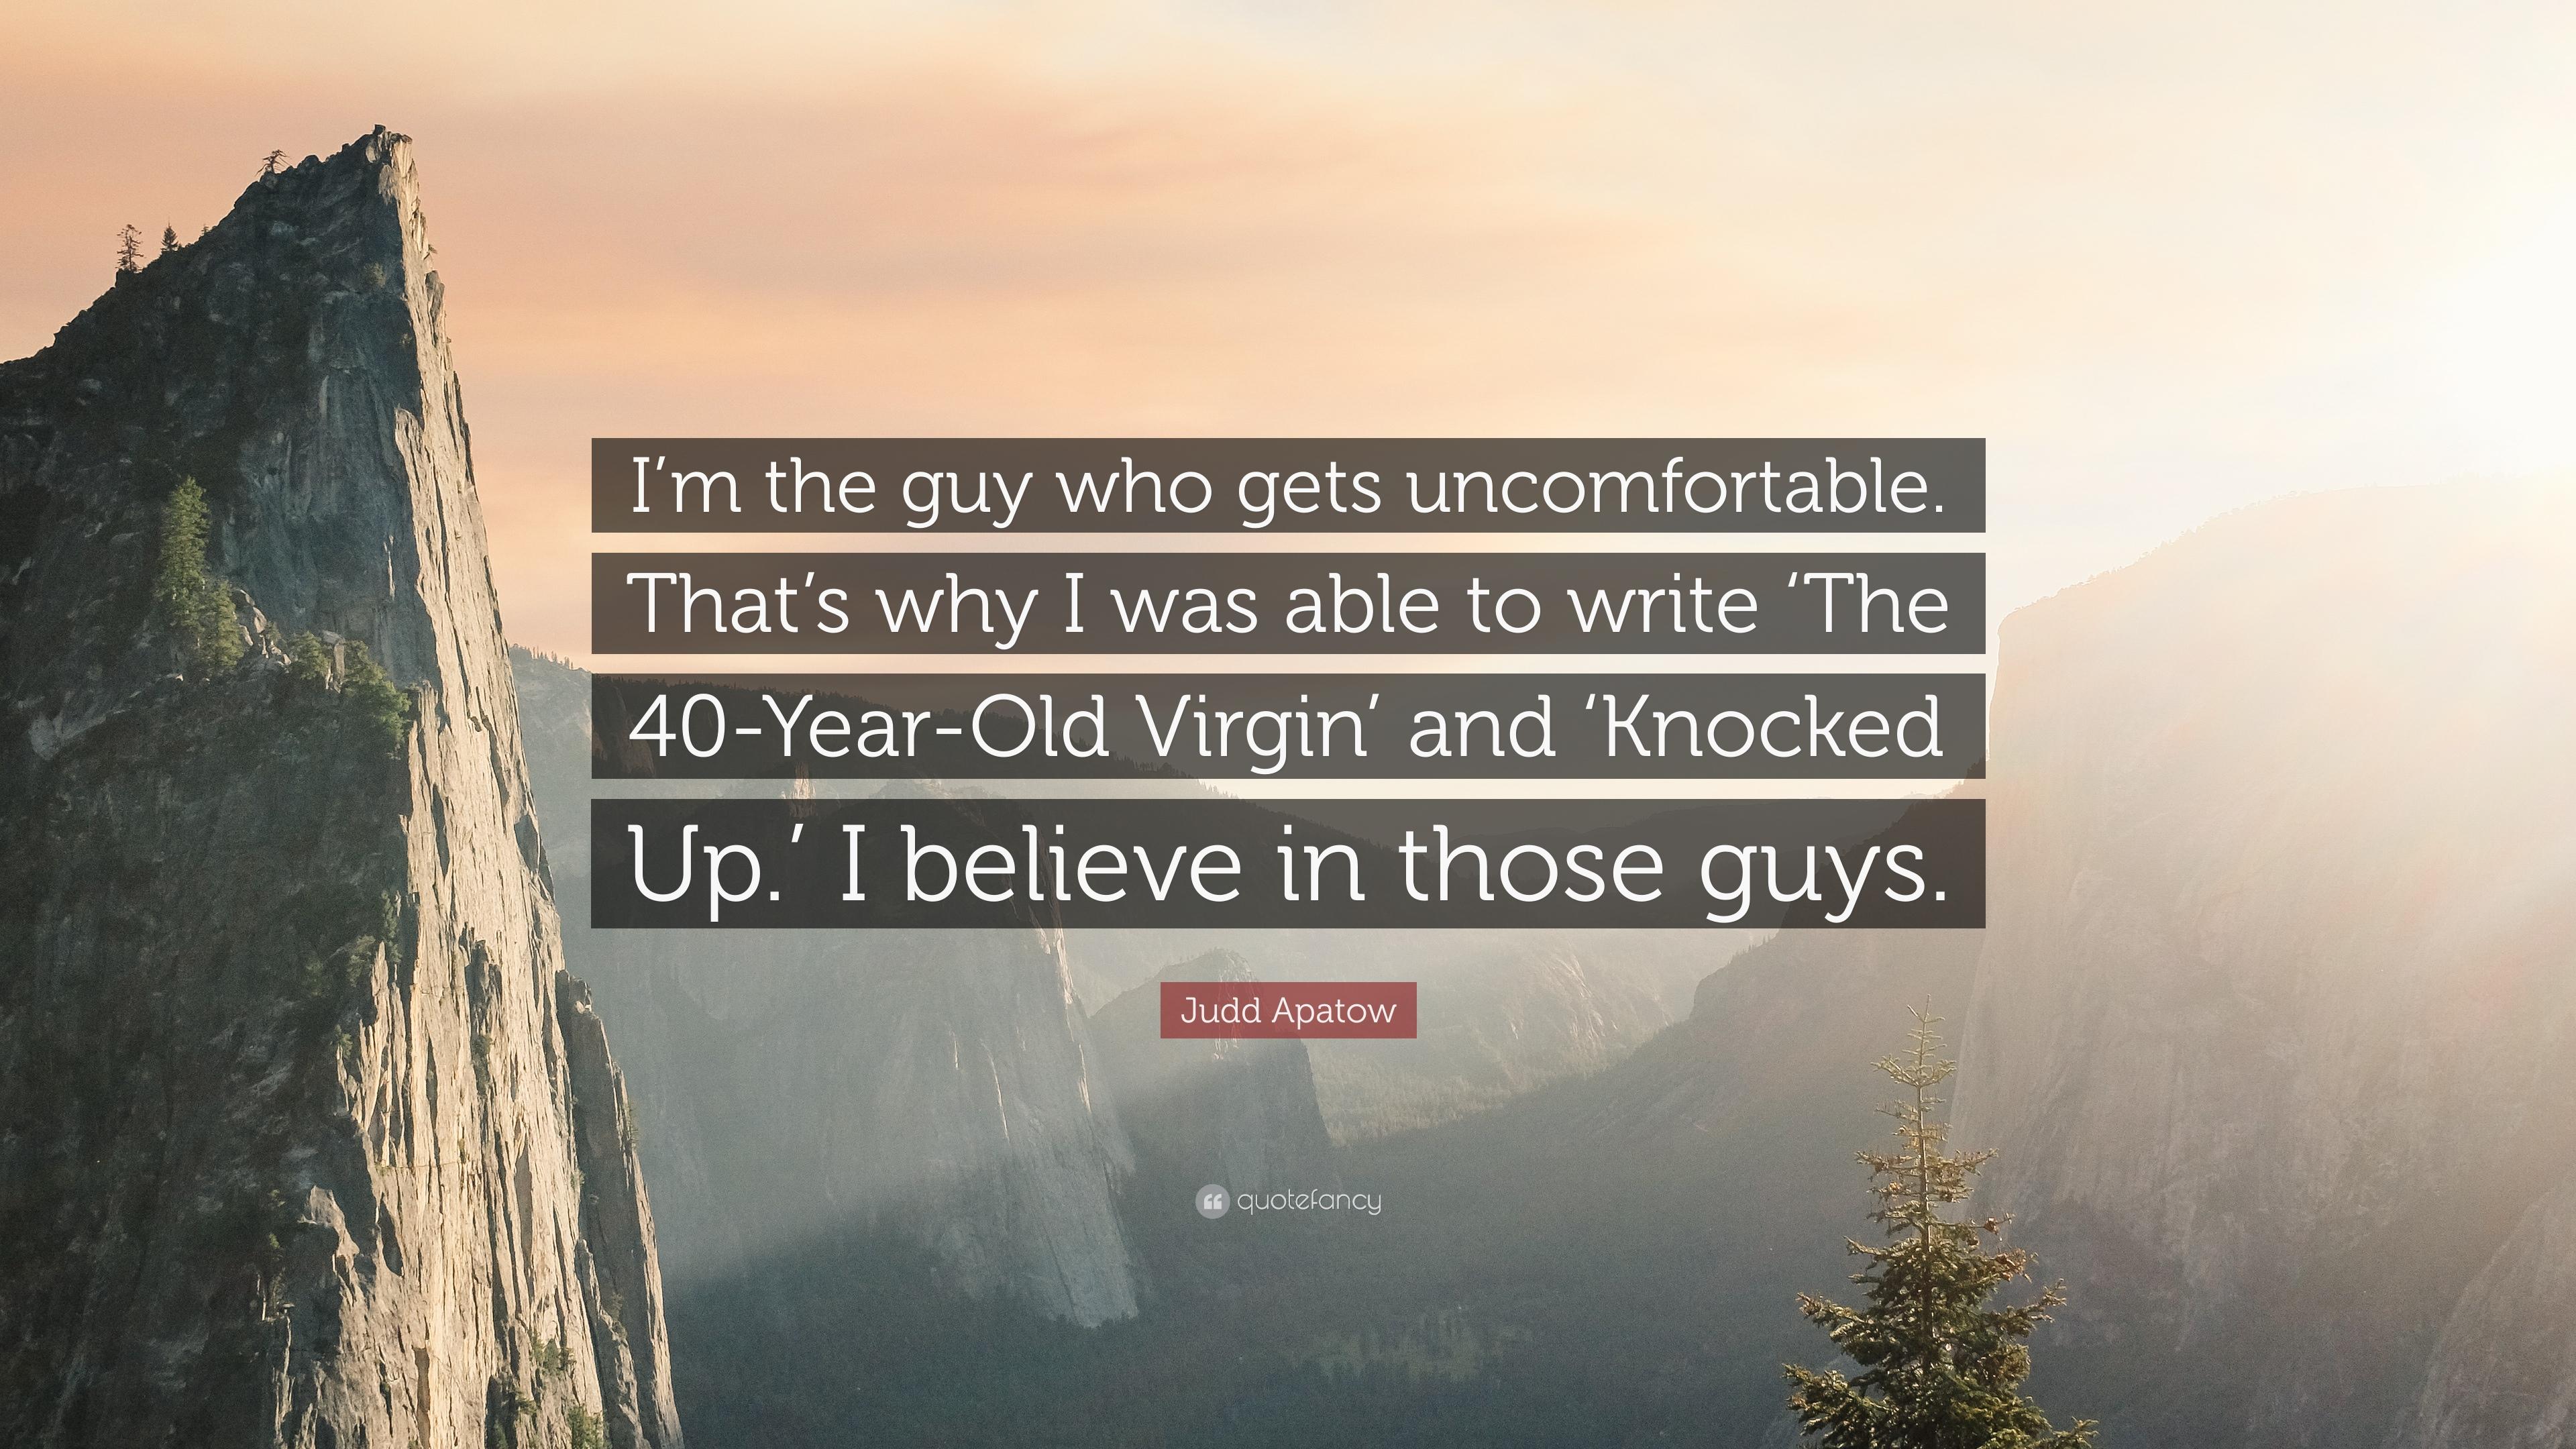 Judd Apatow Quote: “I'm the guy who gets uncomfortable